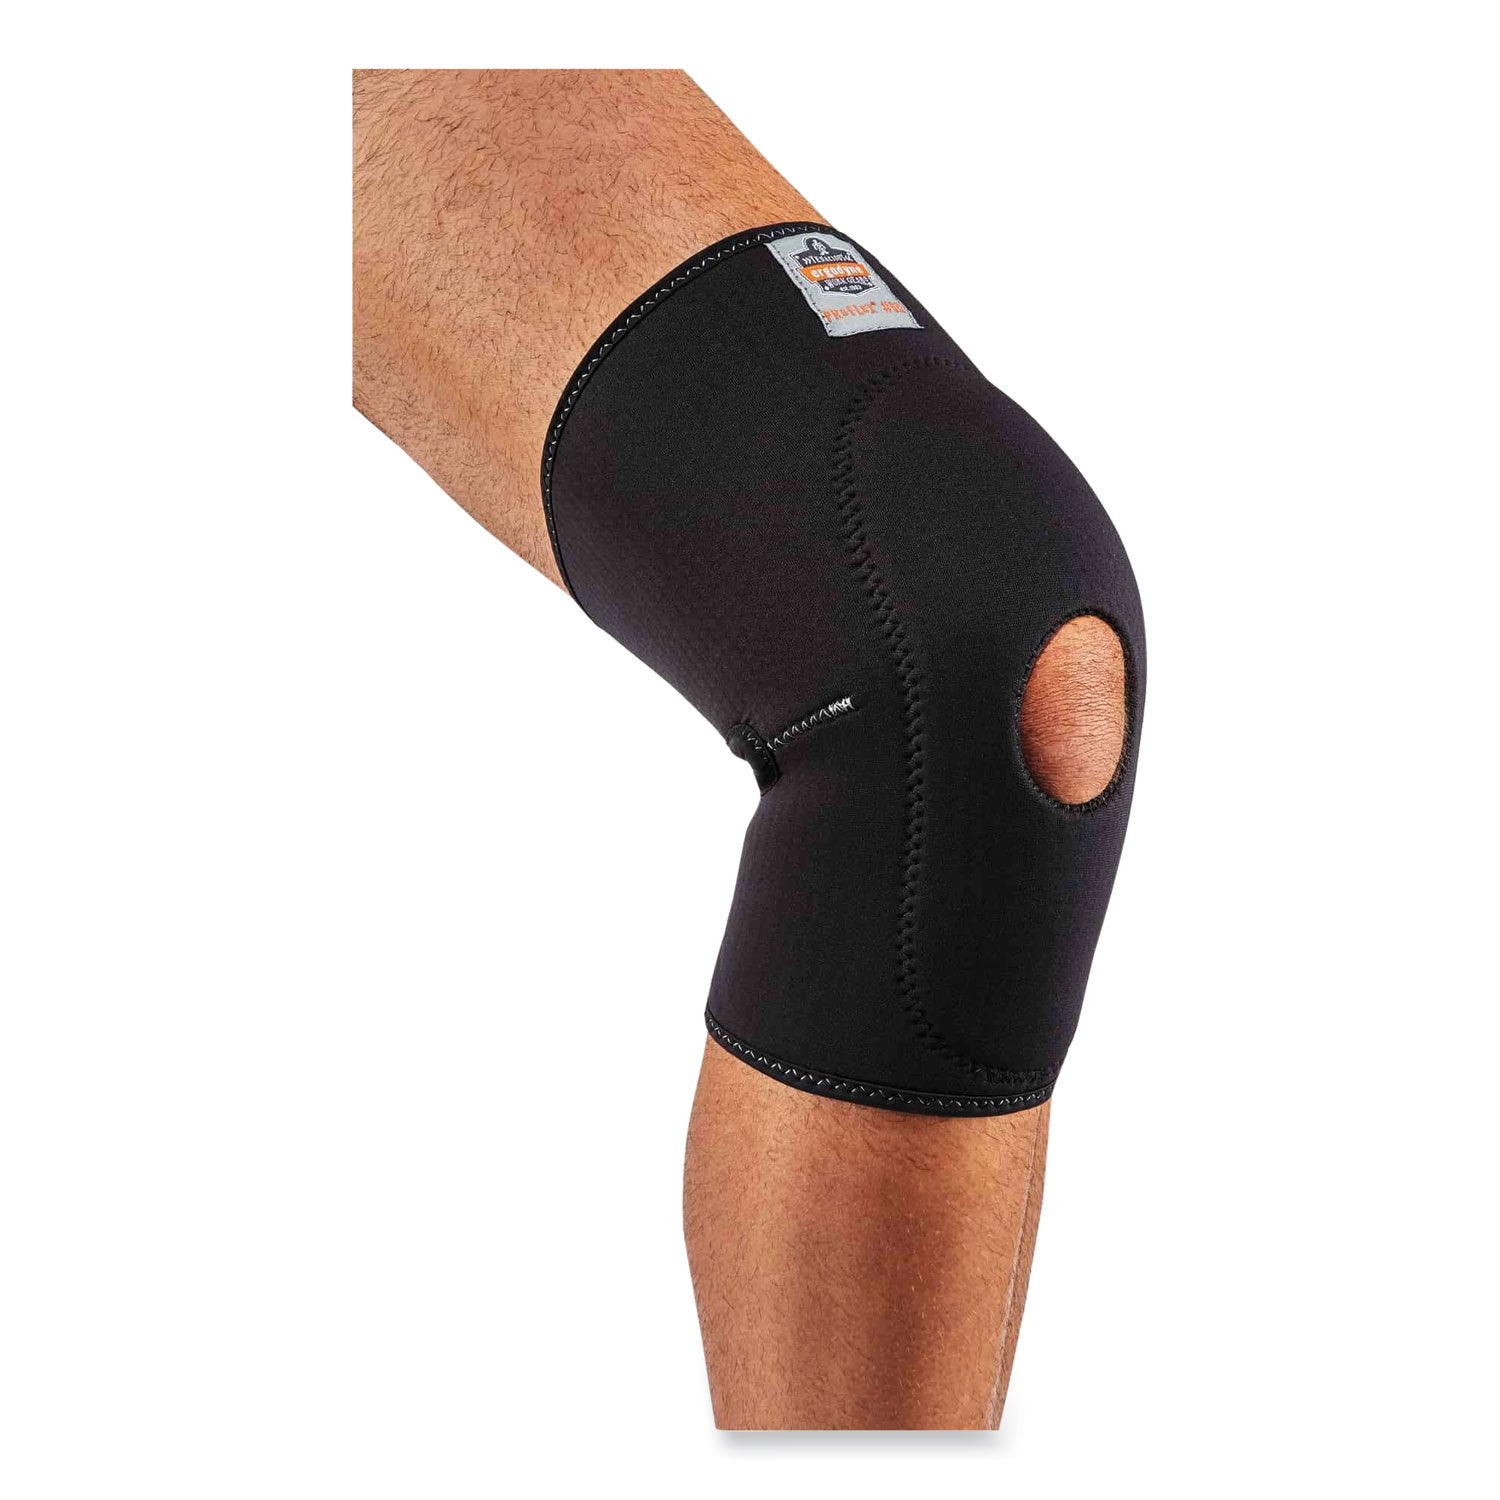 proflex-615-open-patella-anterior-pad-knee-sleeve-x-large-black-ships-in-1-3-business-days_ego16535 - 3